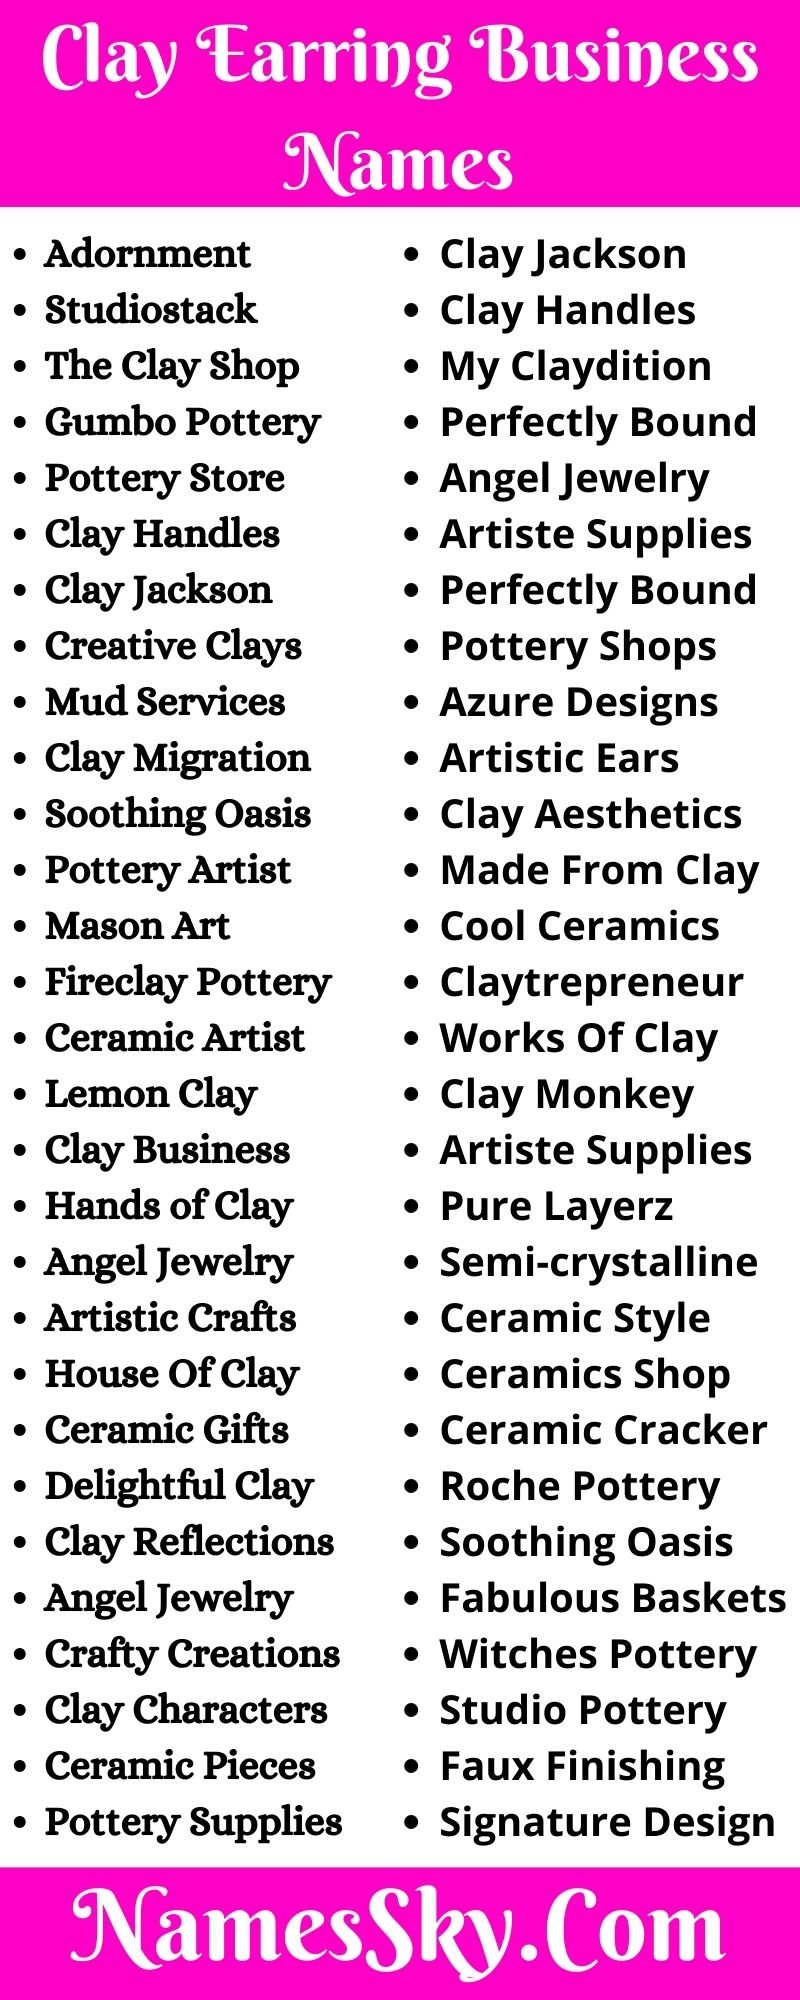 Clay Earring Business Names